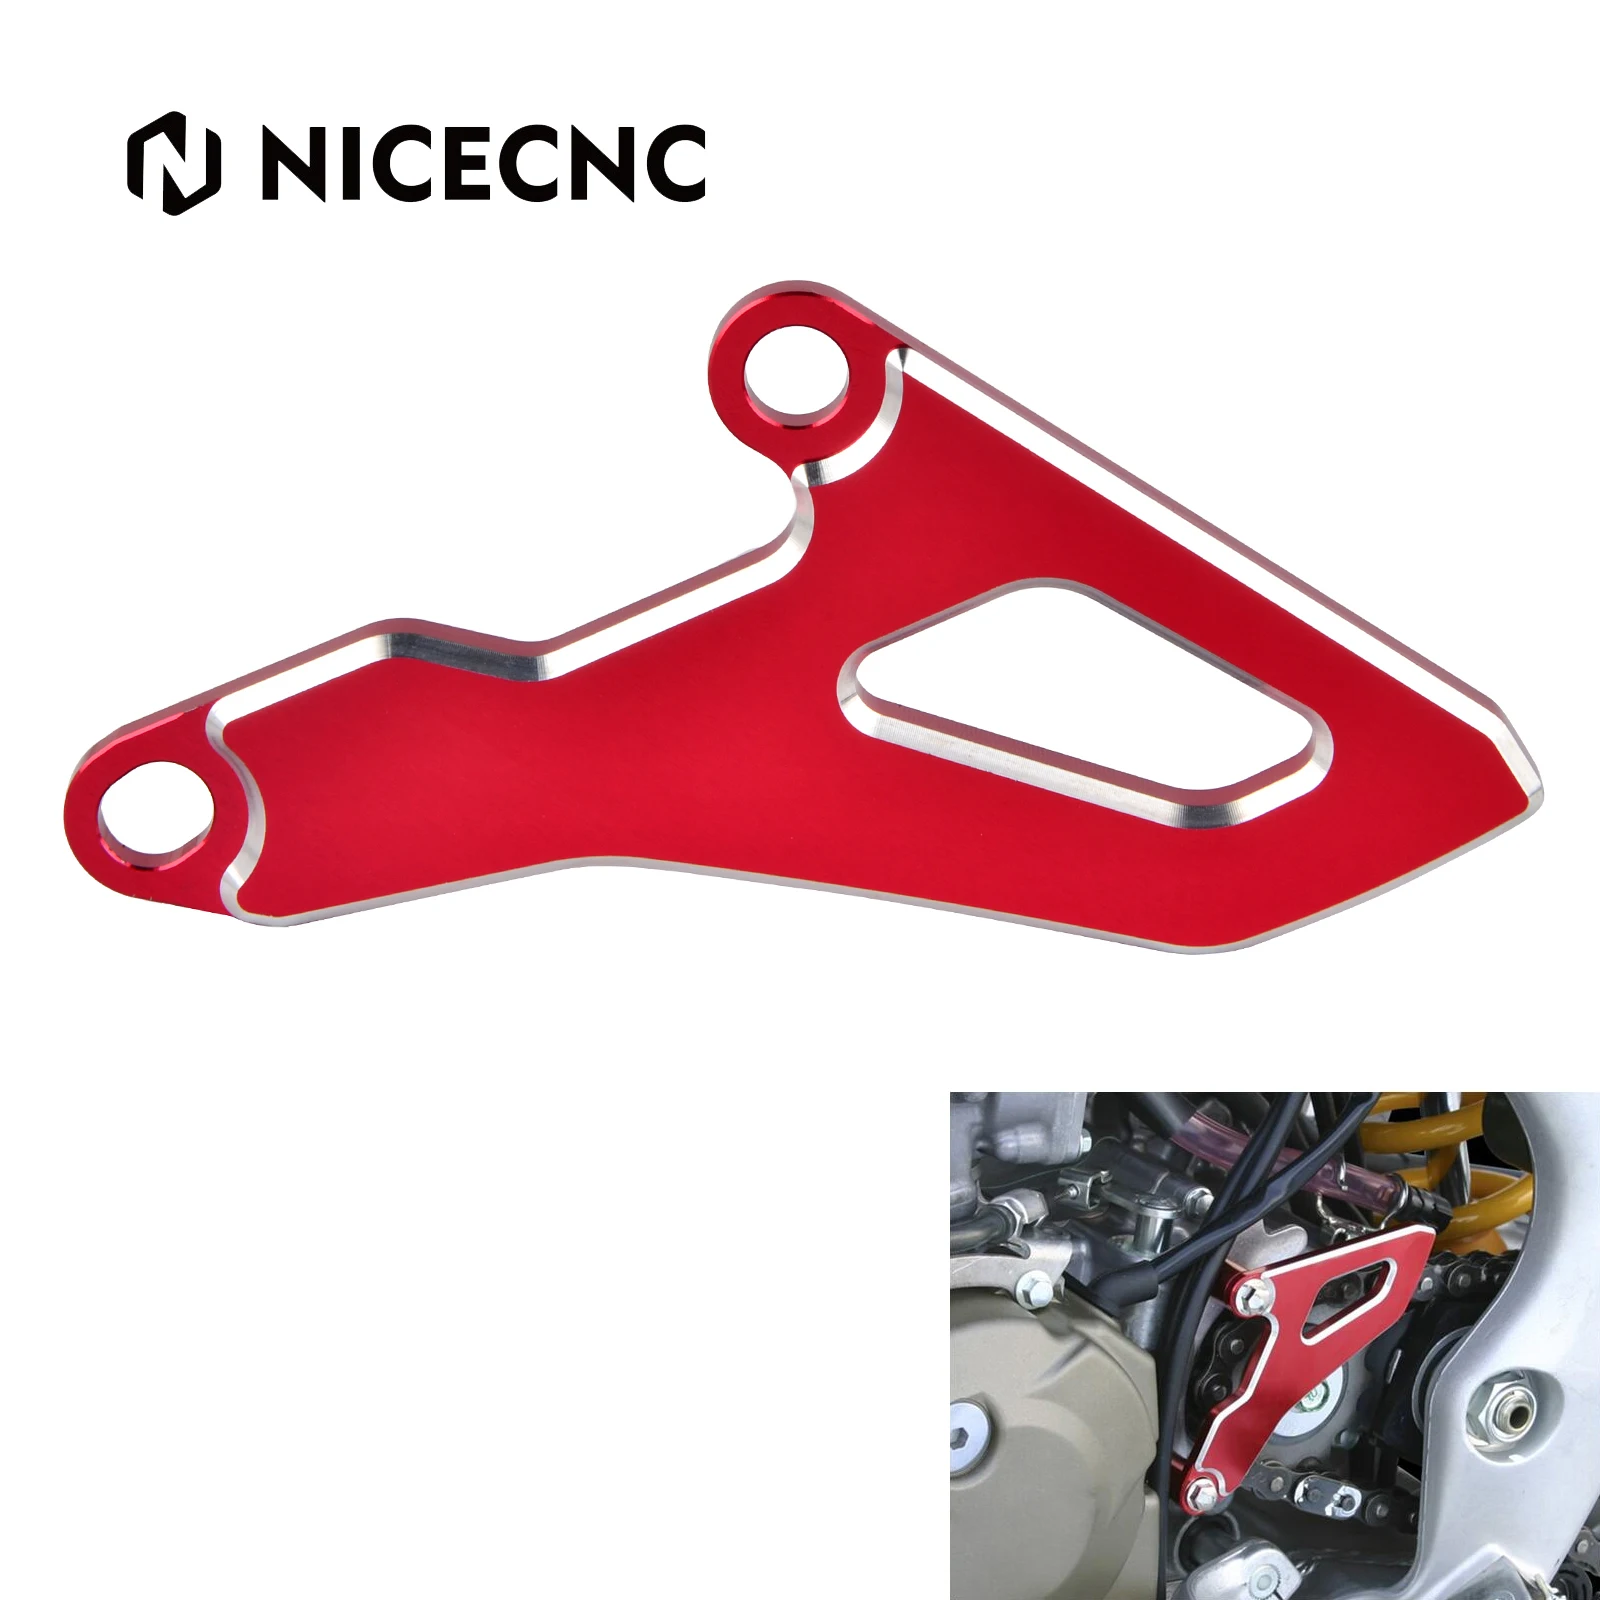 

NiceCNC Front Sprocket Cover Guard Protector Motocross For Honda CR250R 2002-2007 CRF250R 2004-2009 CRF250X 04-17 CR CRF 250R